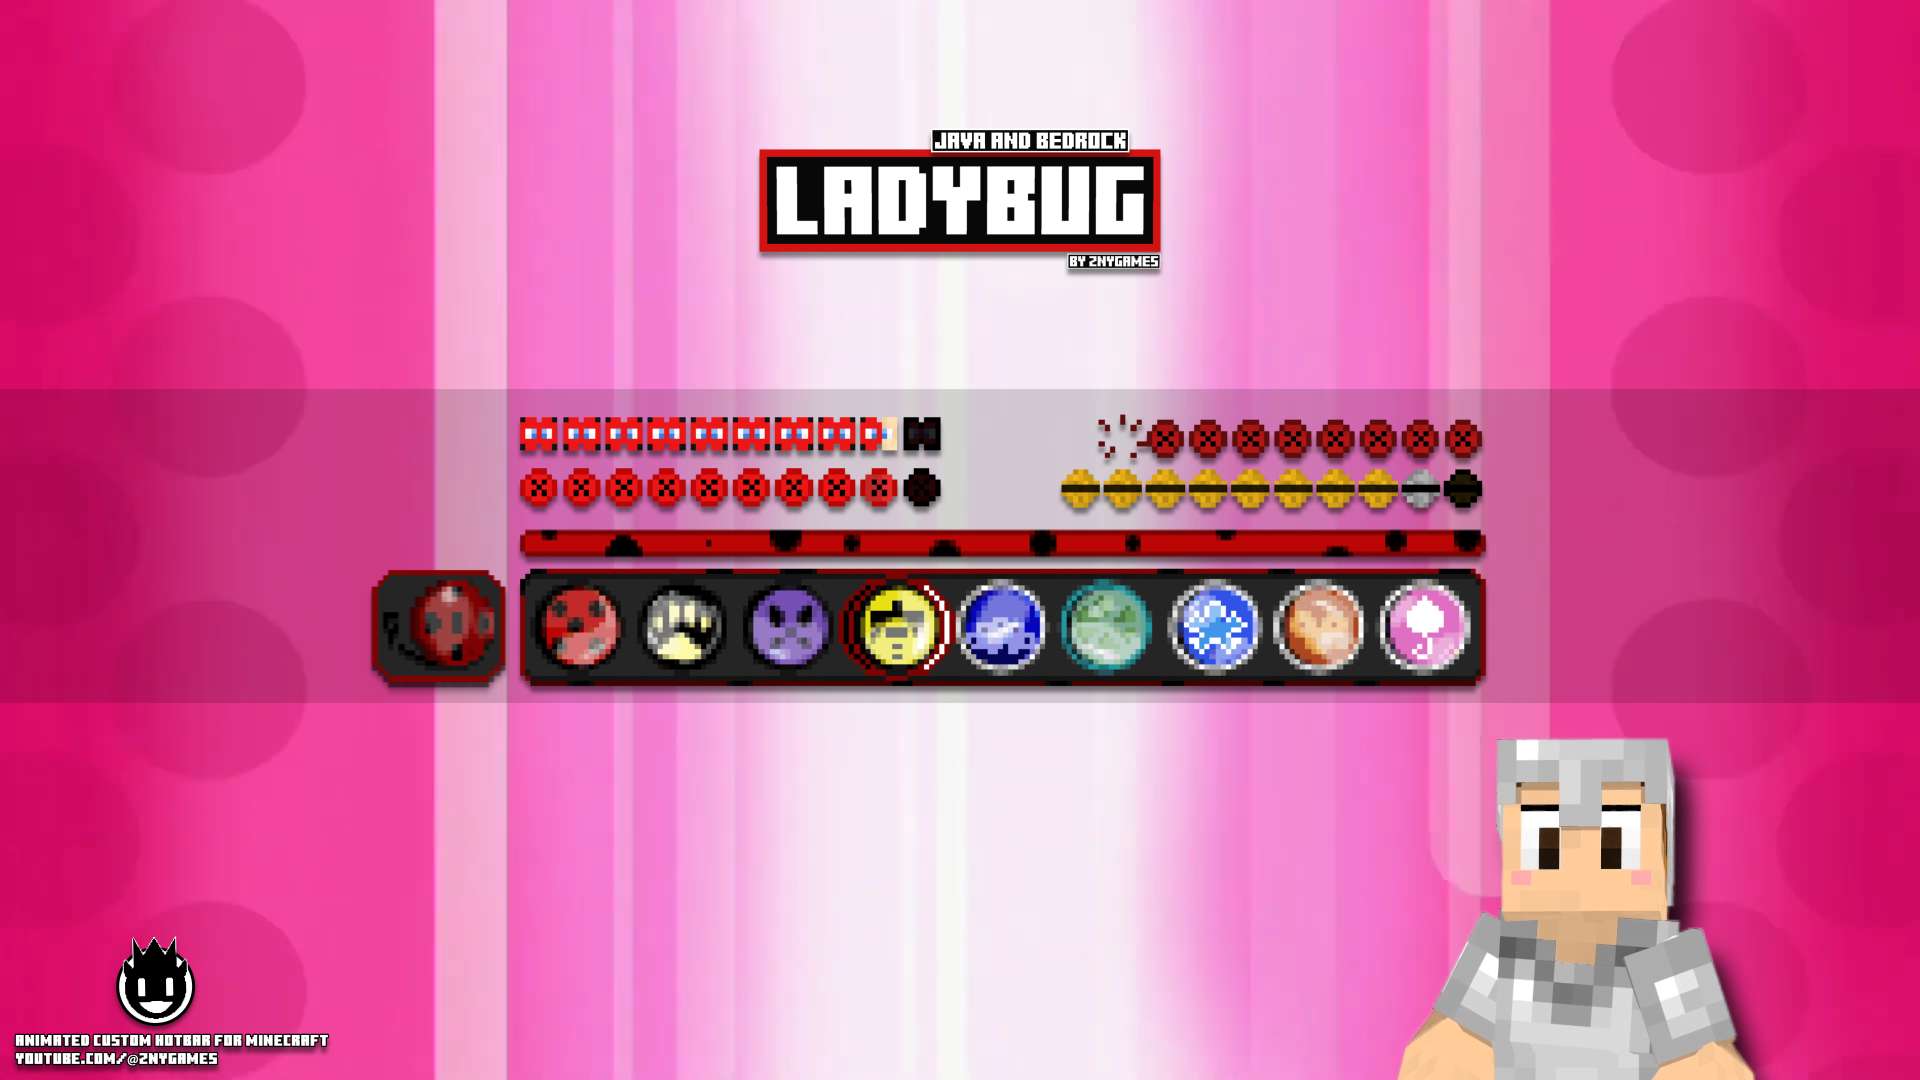 LADYBUG 16x by znygames & zny games on PvPRP